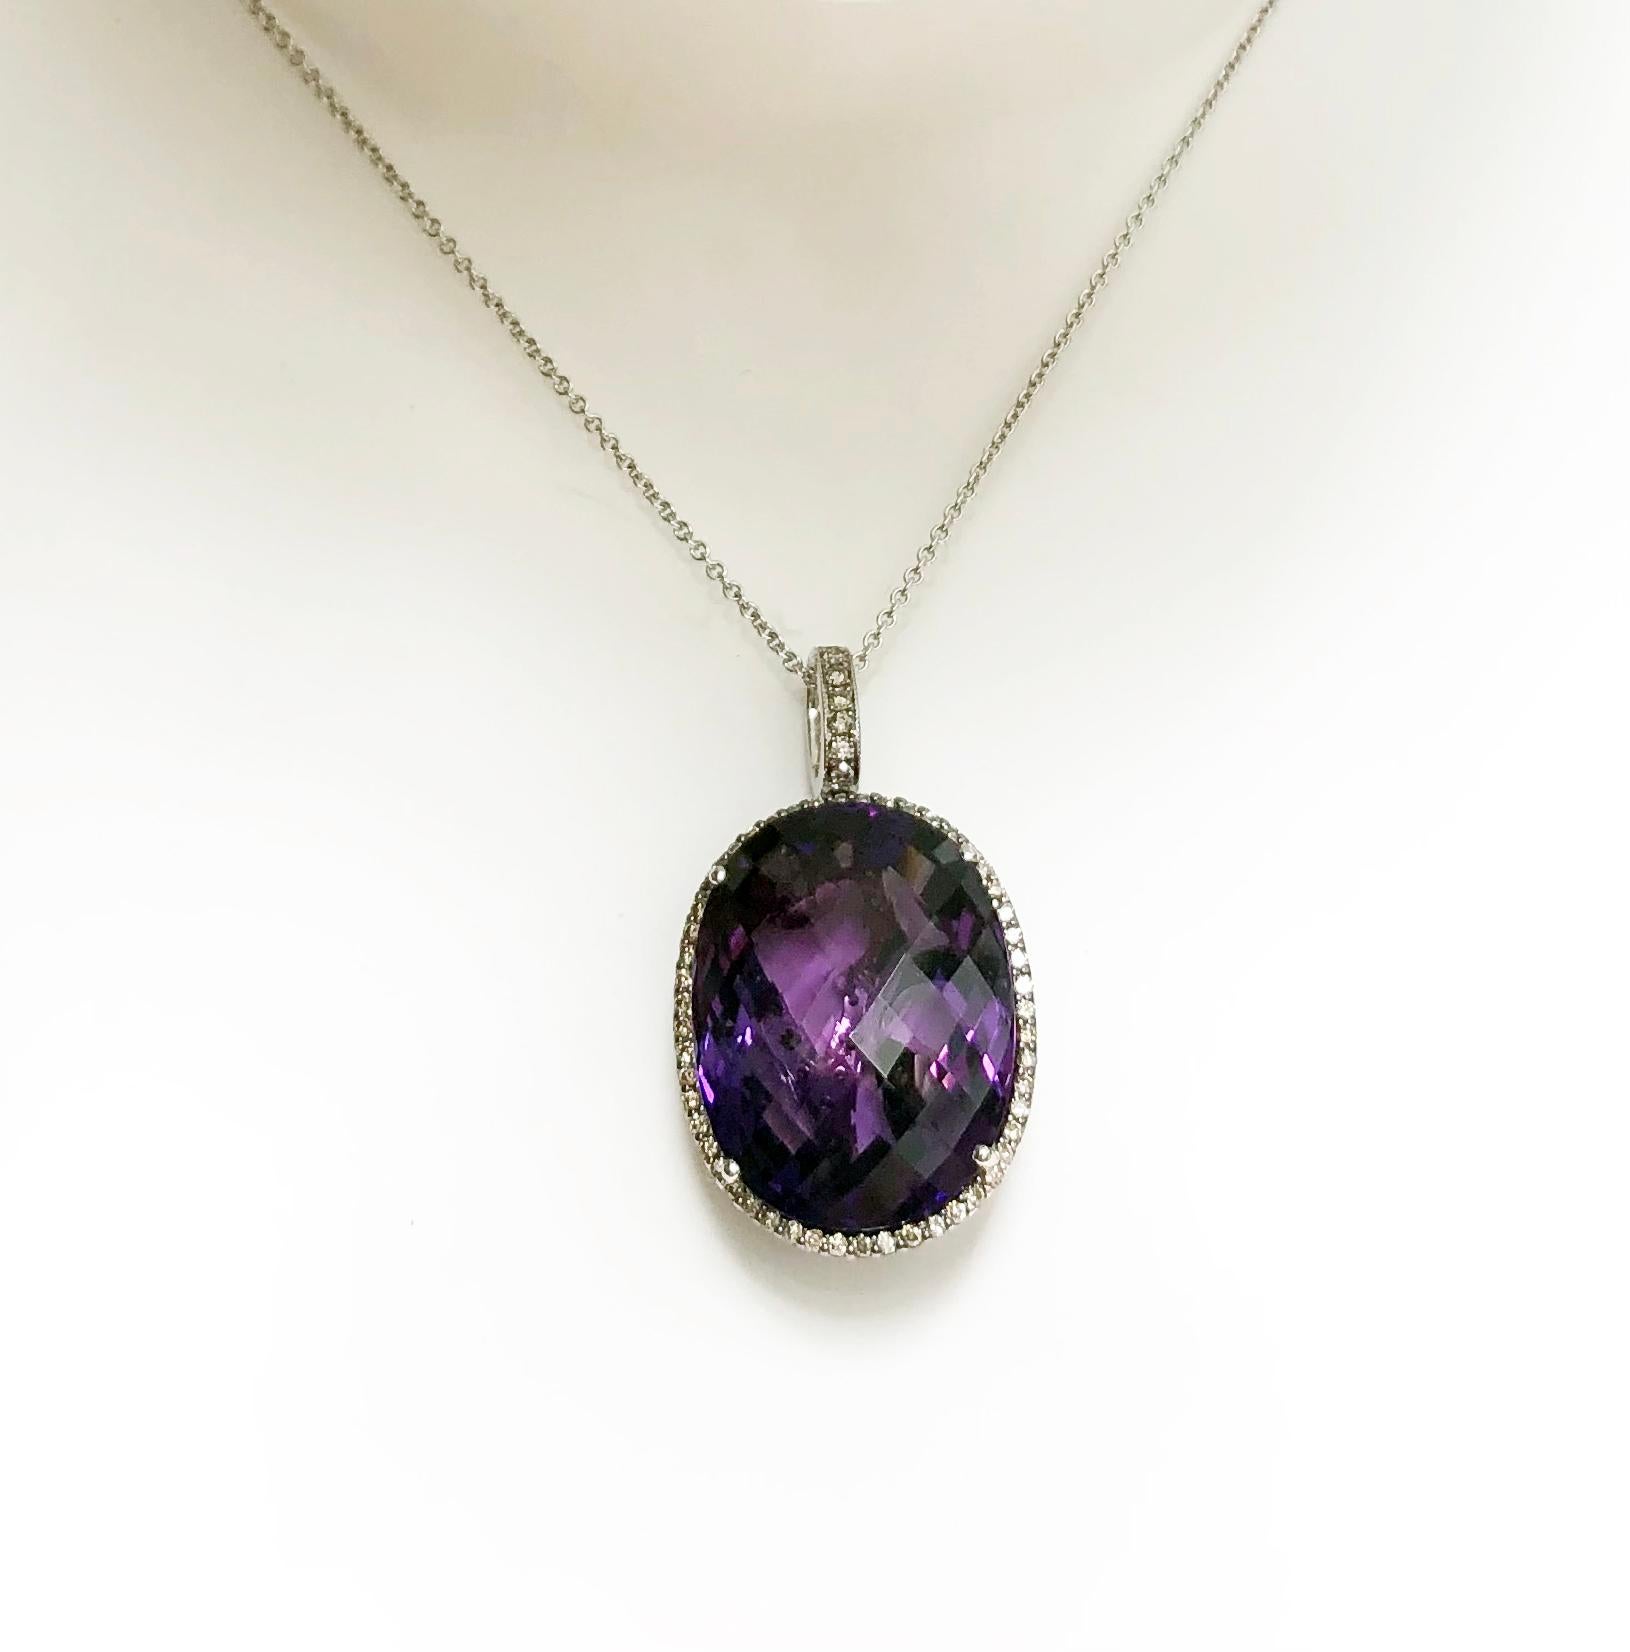 Amethyst 32.29 carats with Brown Diamond 1.26 carats Pendant set in 18 Karat White Gold Settings
(chain not included)

Width:  2.1 cm 
Length: 3.6 cm
Total Weight: 12.19 grams

